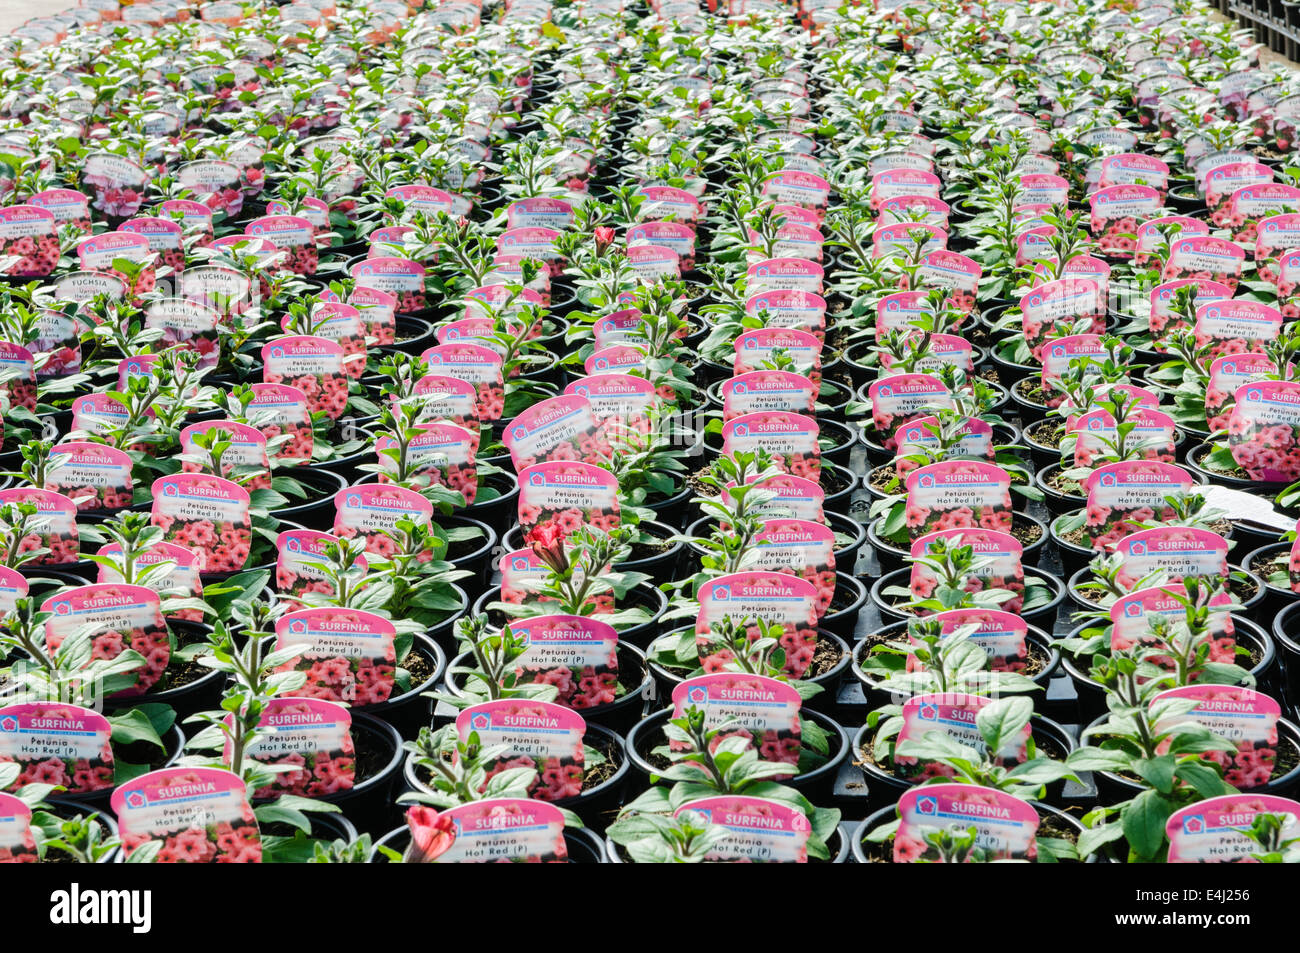 Lots of Surfina plants for sale in a polytunnel greenhouse. Stock Photo